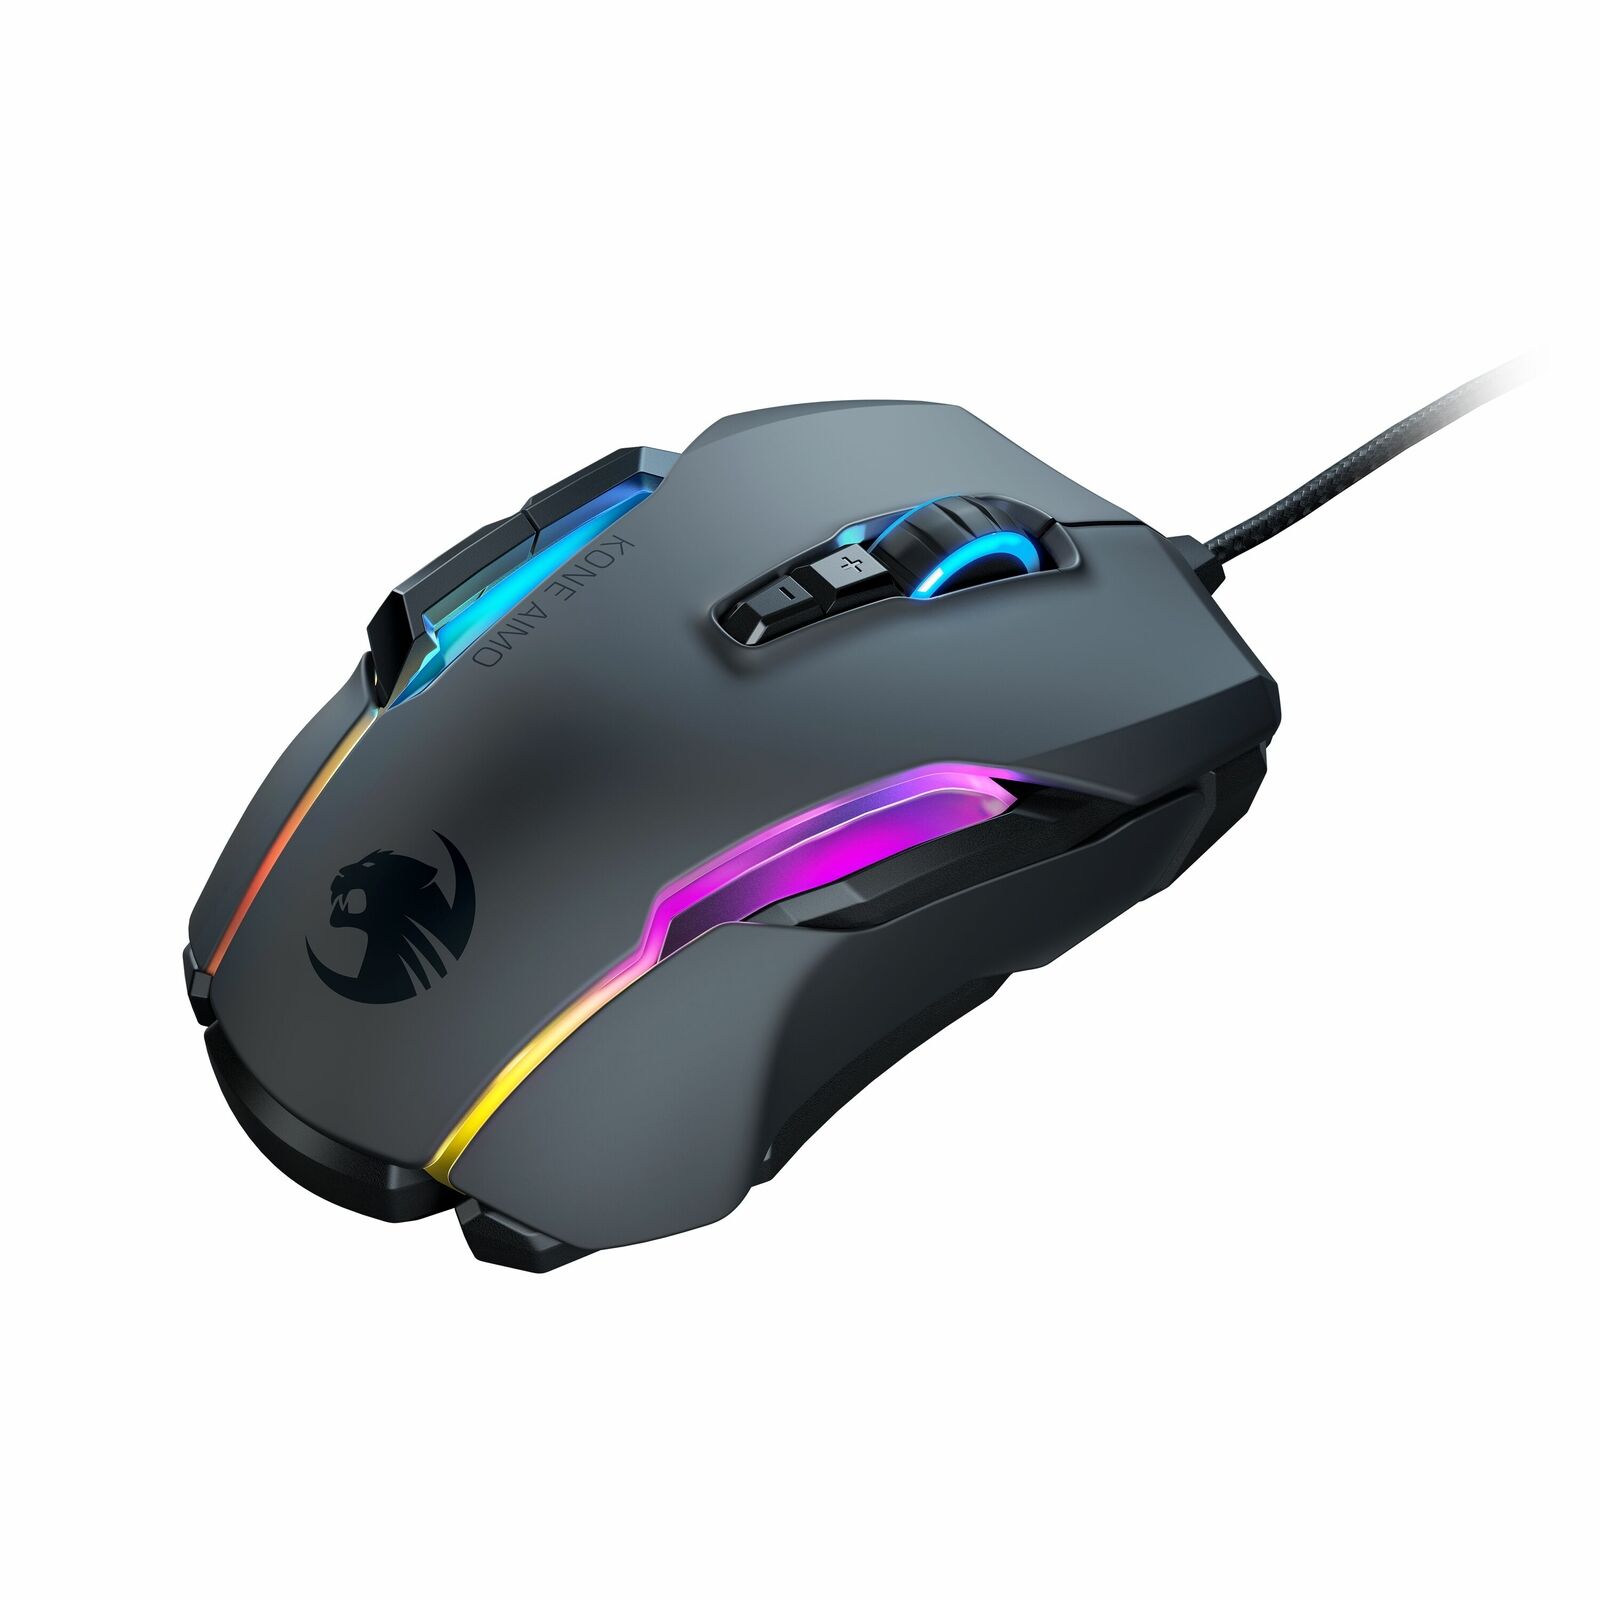 ROCCAT ROC-11-820-BK Kone AIMO Remastered RGBA Smart Customization Gaming Mouse - Black - image 3 of 6